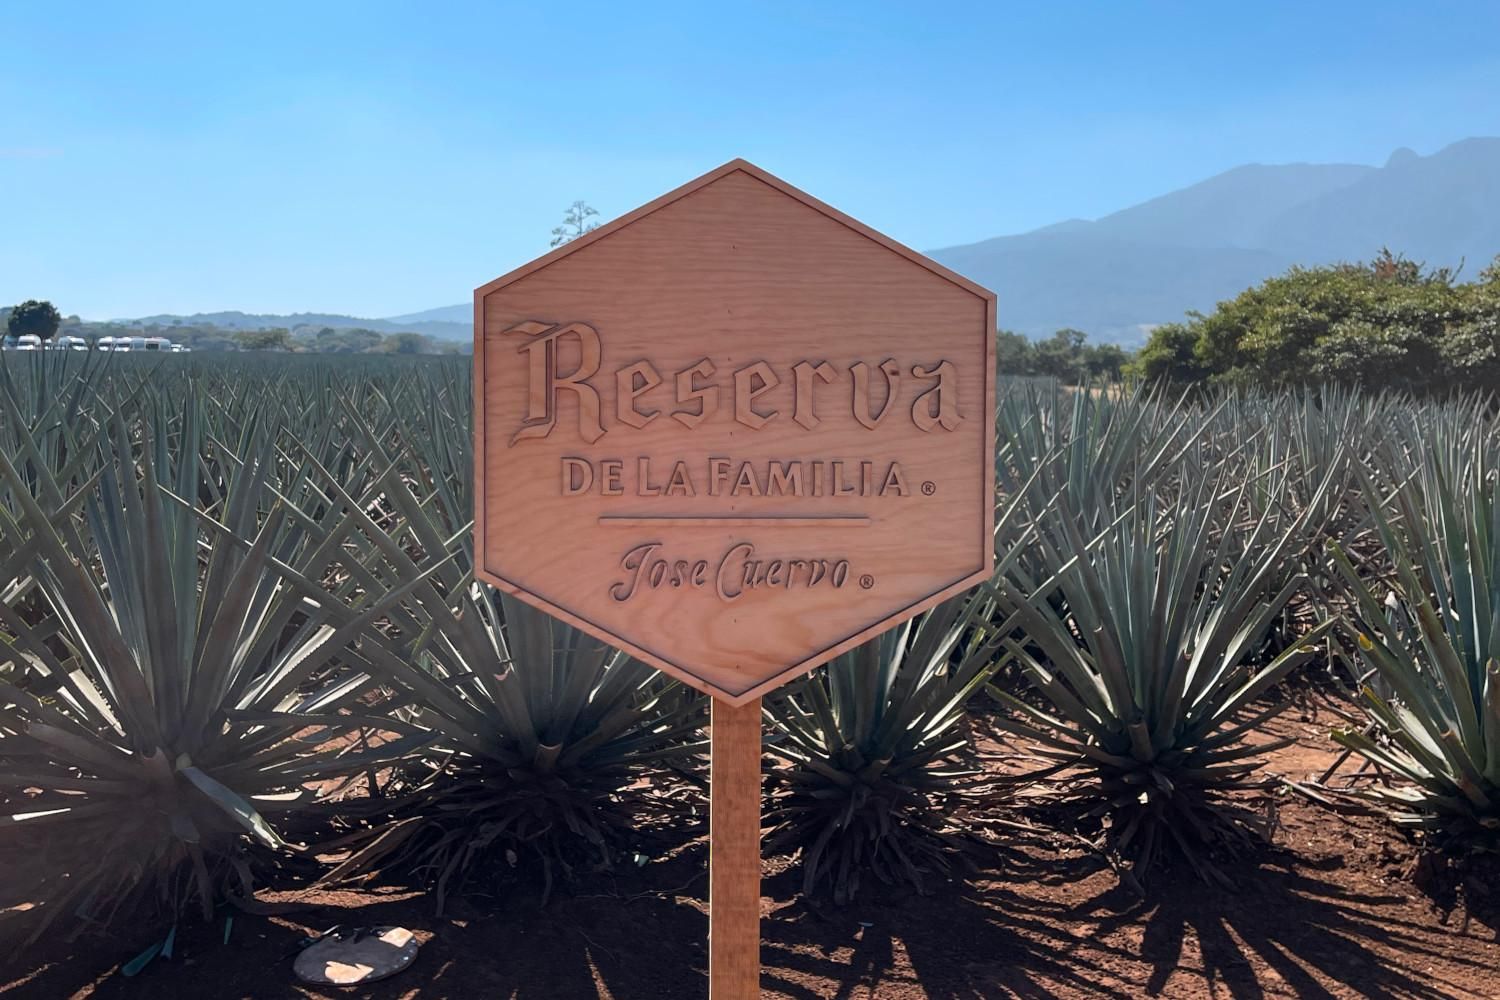 José Cuervo sign in front of agave plants and mountains in the background.